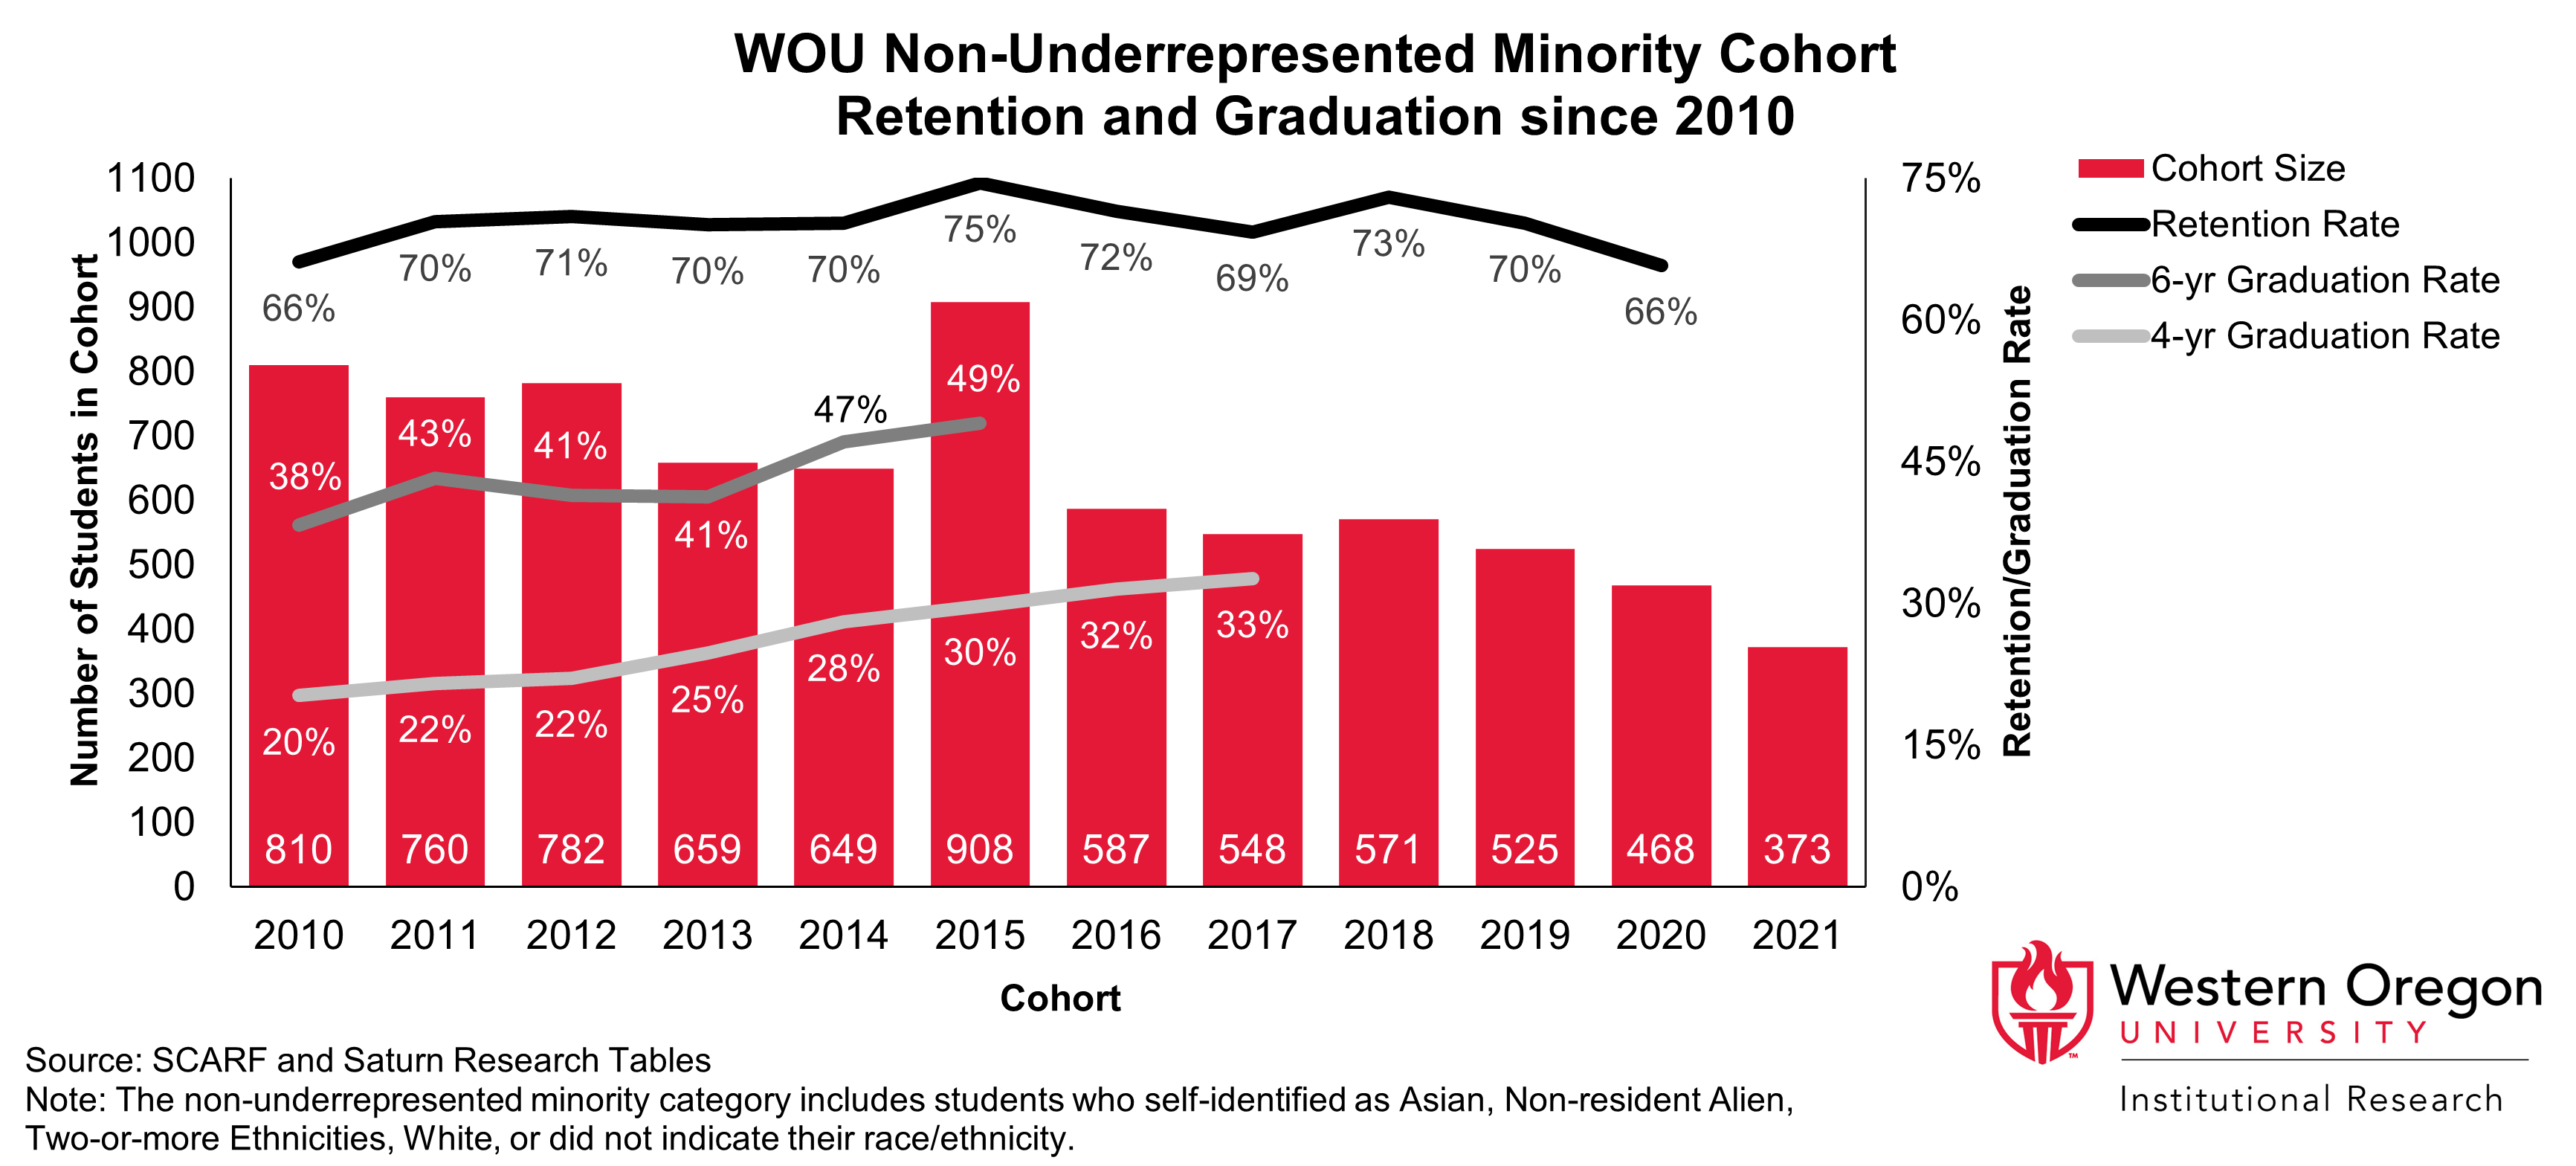 Bar and line graph of retention and 4- and 6-year graduation rates since 2010 for WOU students that are not from underrepresented minority groups, showing that graduation rates have been steadily increasing while retention rates have remained largely stable